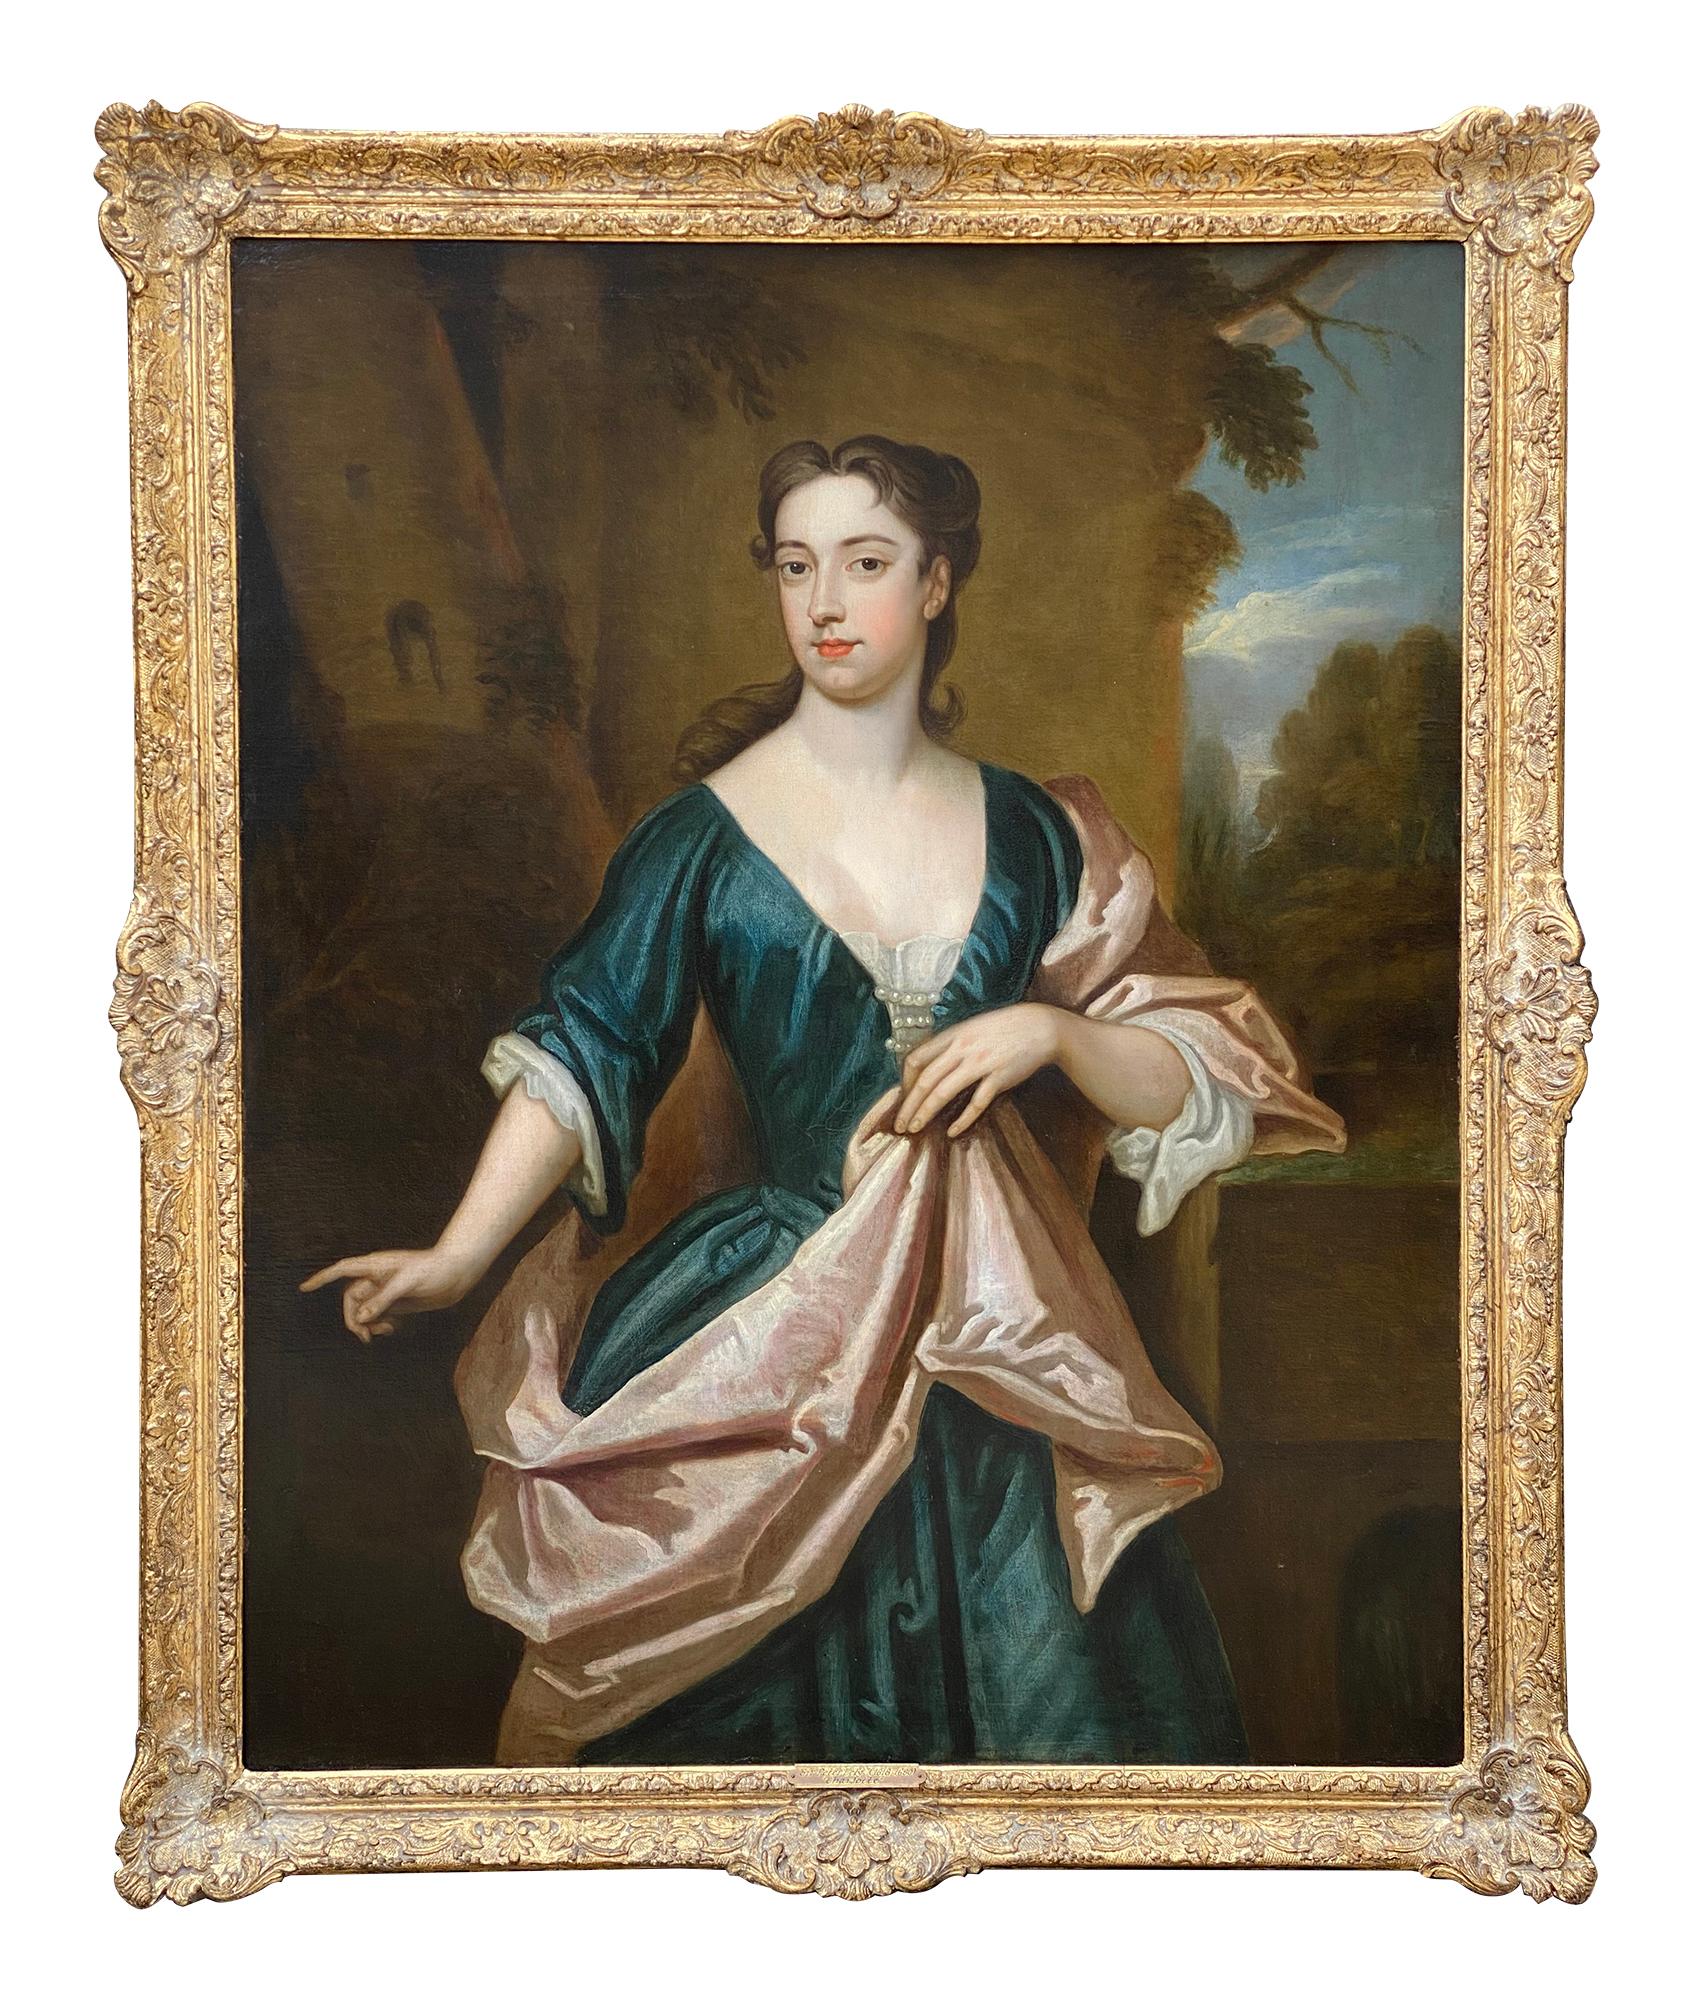 (Circle of) Godfrey Kneller Portrait Painting - EARLY 18TH CENTURY ENGLISH PORTRAIT OF A LADY - CIRCLE OF SIR GODFREY KNELLER.